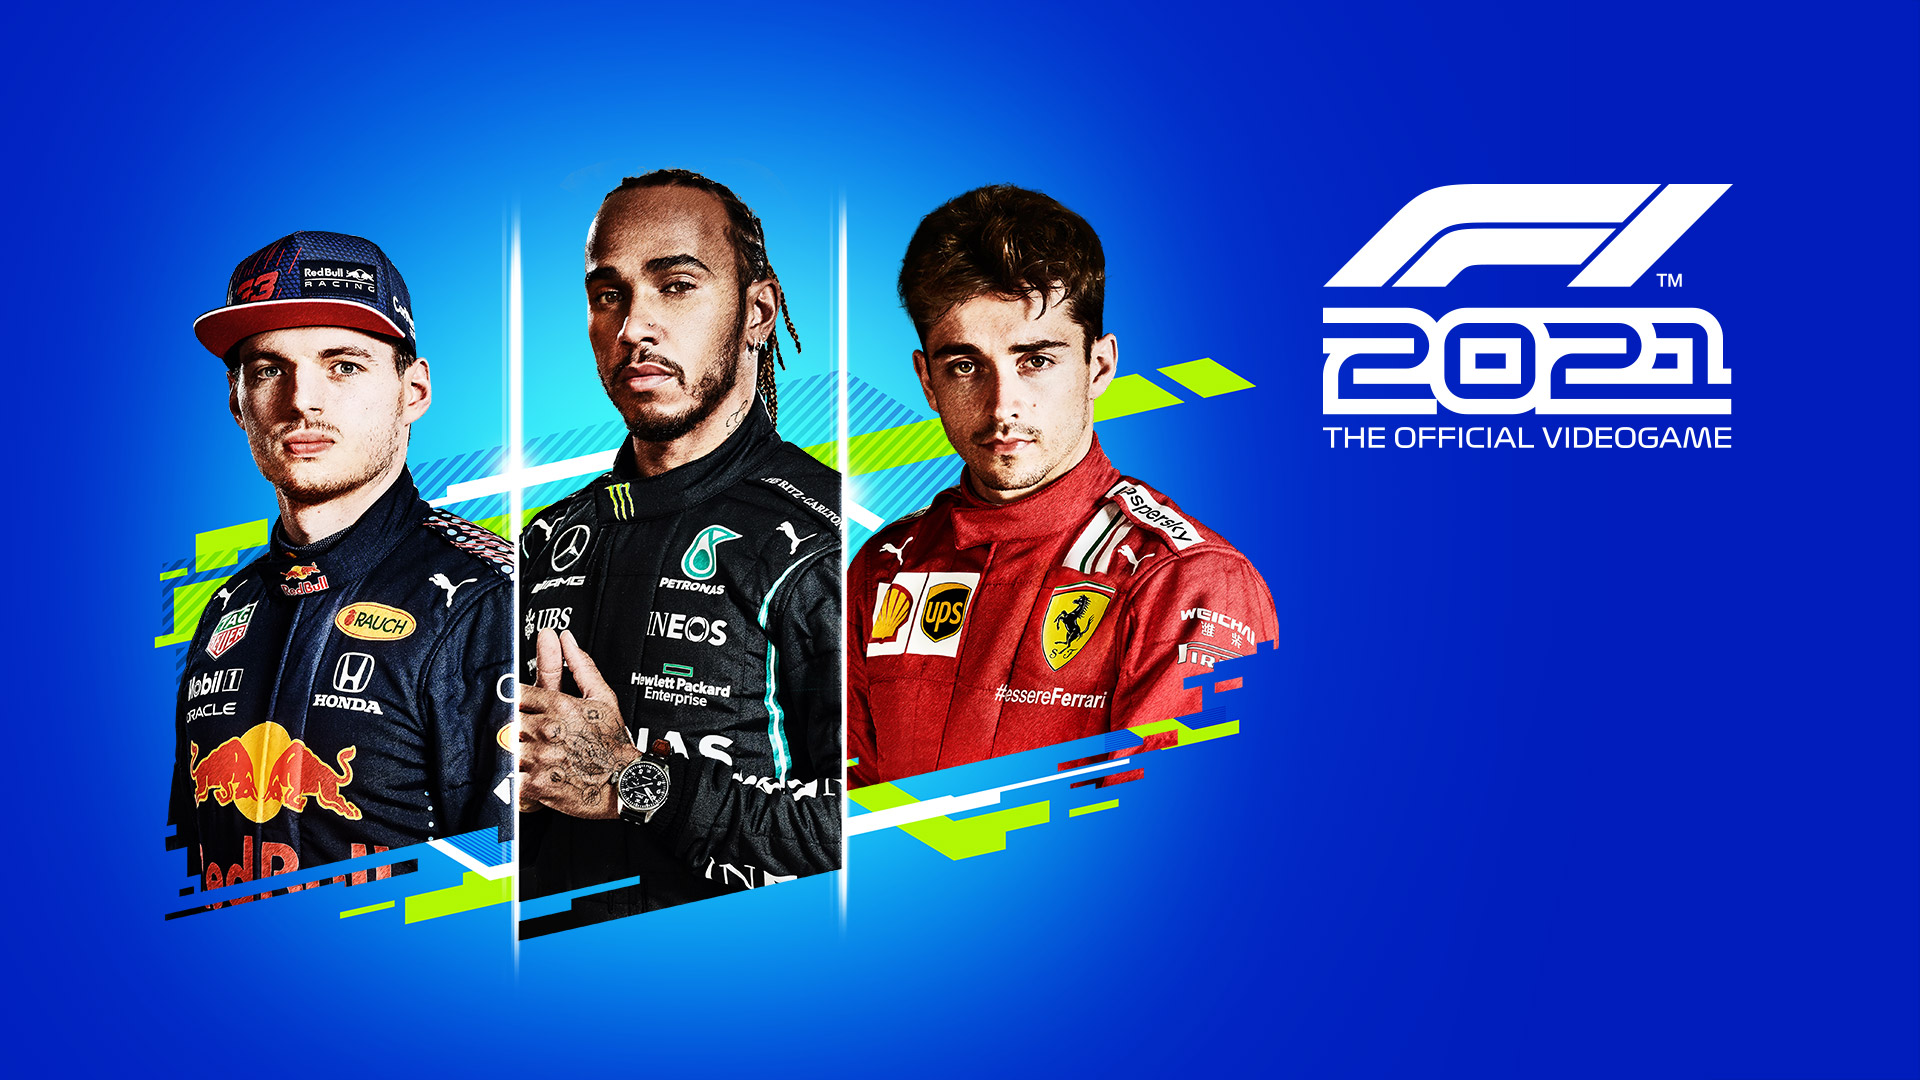 Revealed: Discover your favourite driver's official rating in the new F1 2021 video game. Formula 1®